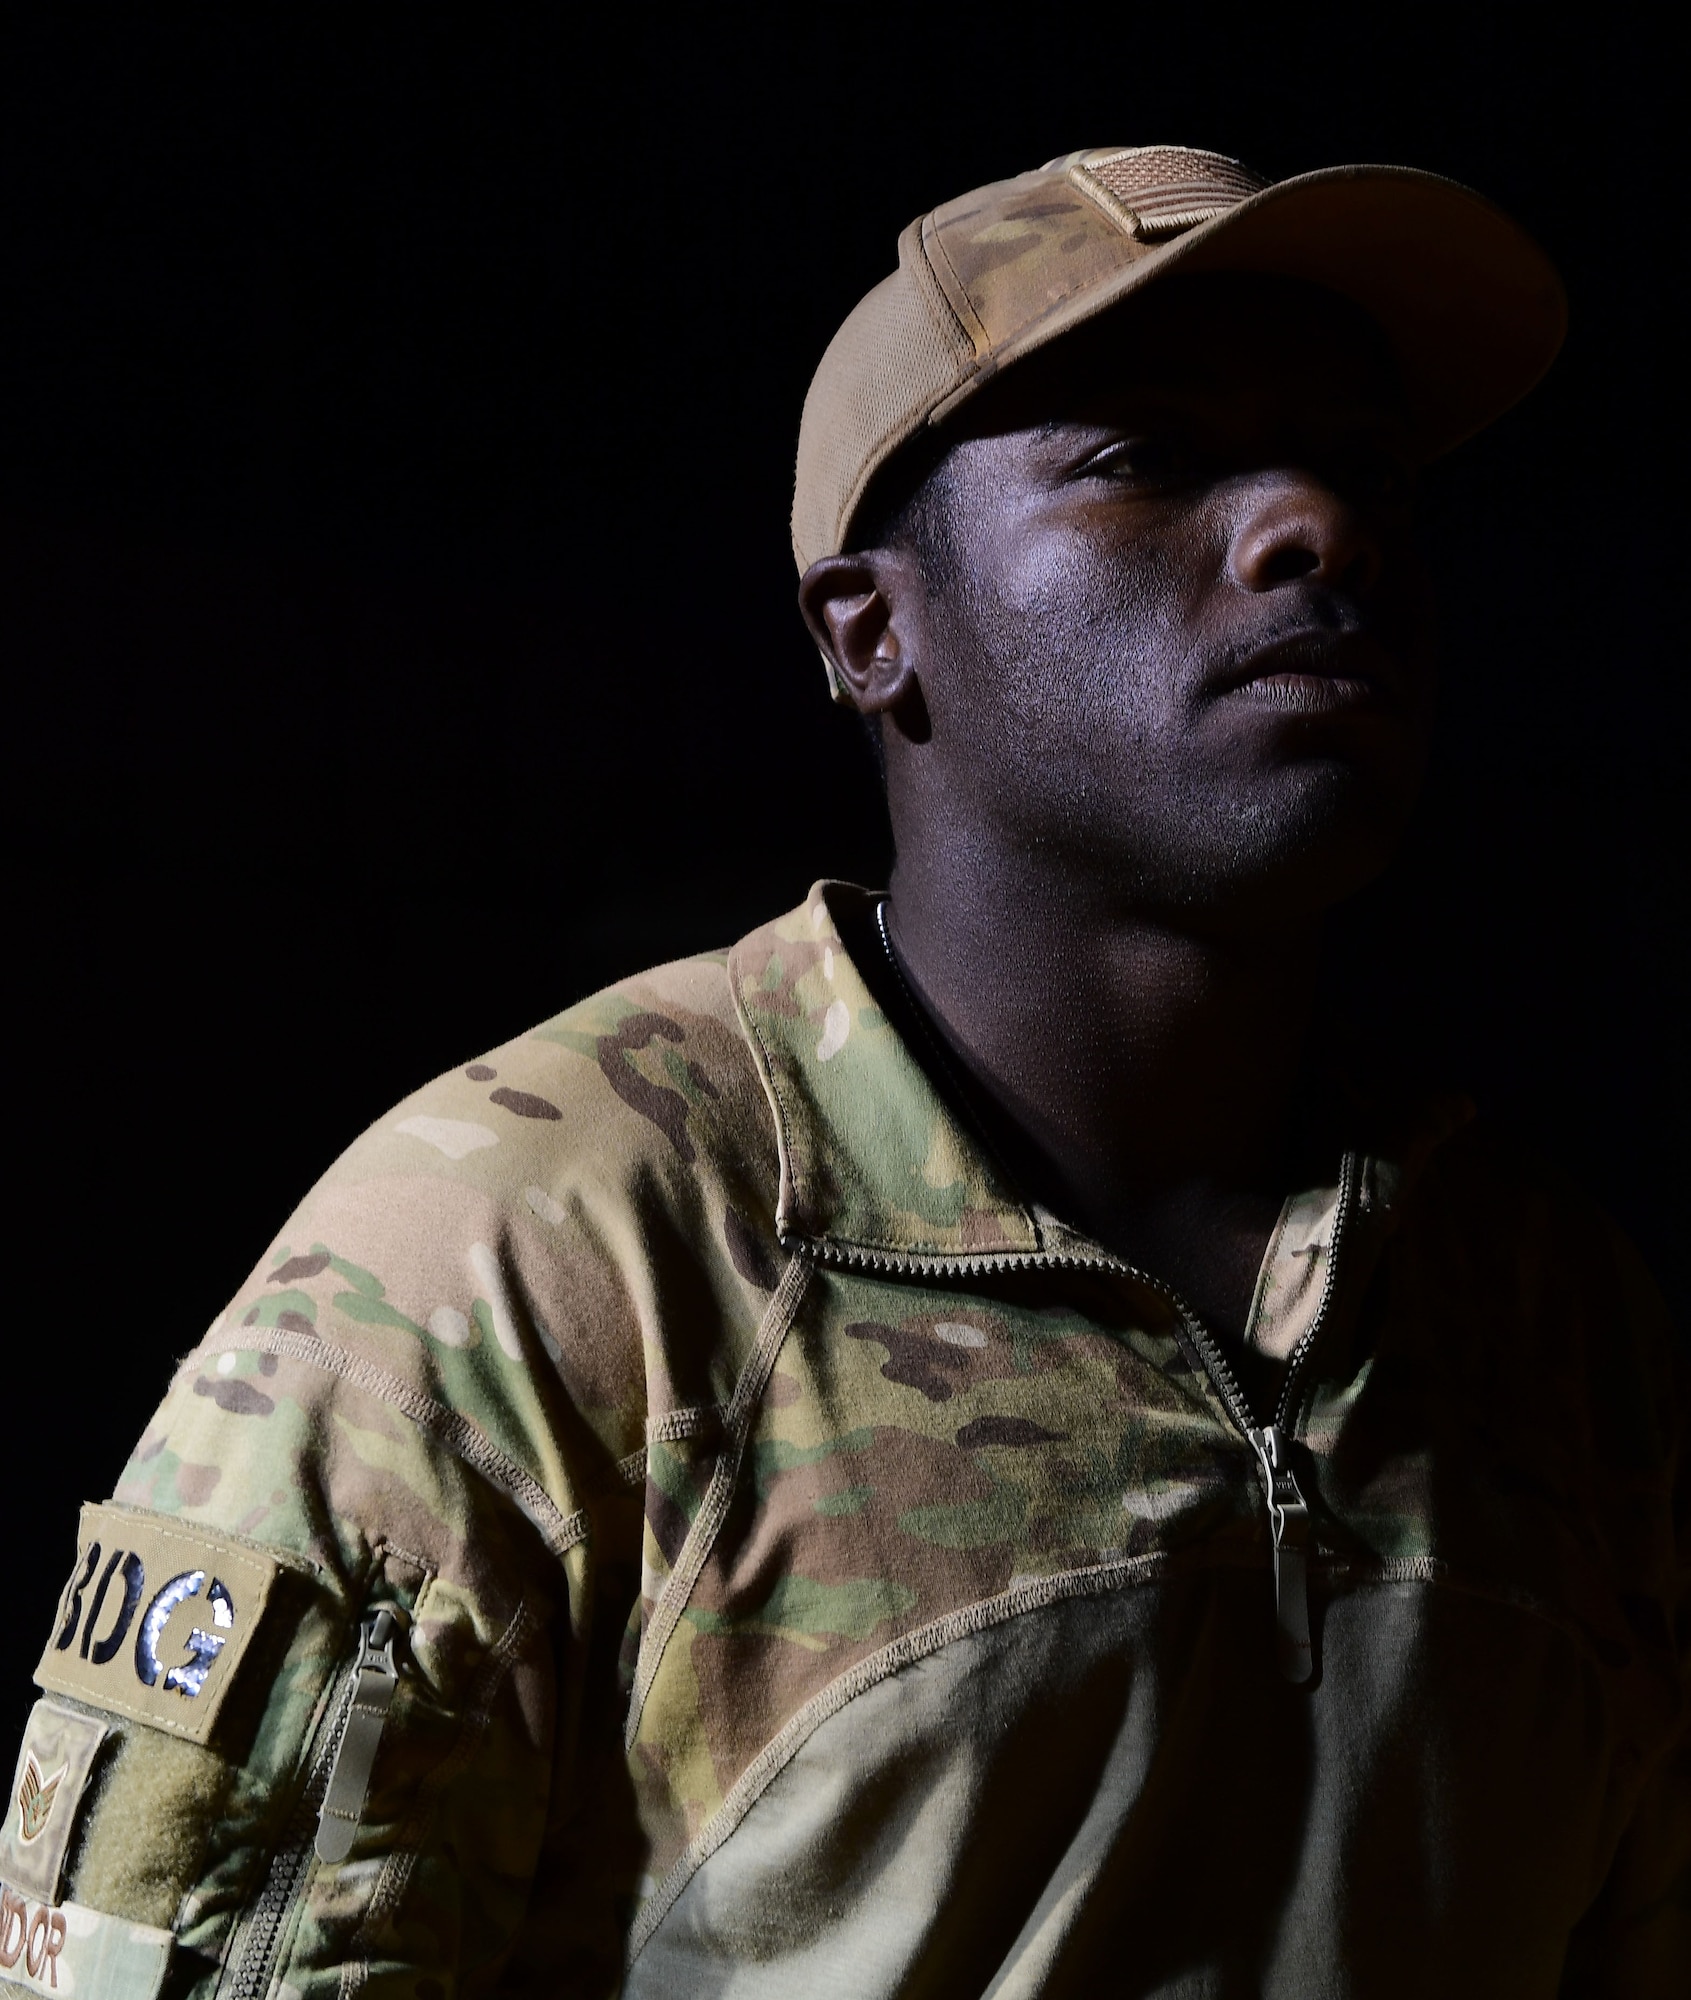 U.S. Air Force Staff Sgt. Mackenzie Isidor, 822nd Expeditionary Base Defense Squadron fire team leader, stands on post at Nigerien Air Base 201, in Agadez, Niger, Feb. 26, 2018. Isidor is currently deployed to West Africa out of Moody Air Force Base, Georgia, and is a five-year Air Force veteran. (U.S. Air Force photo by Tech. Sgt. Nick Wilson)